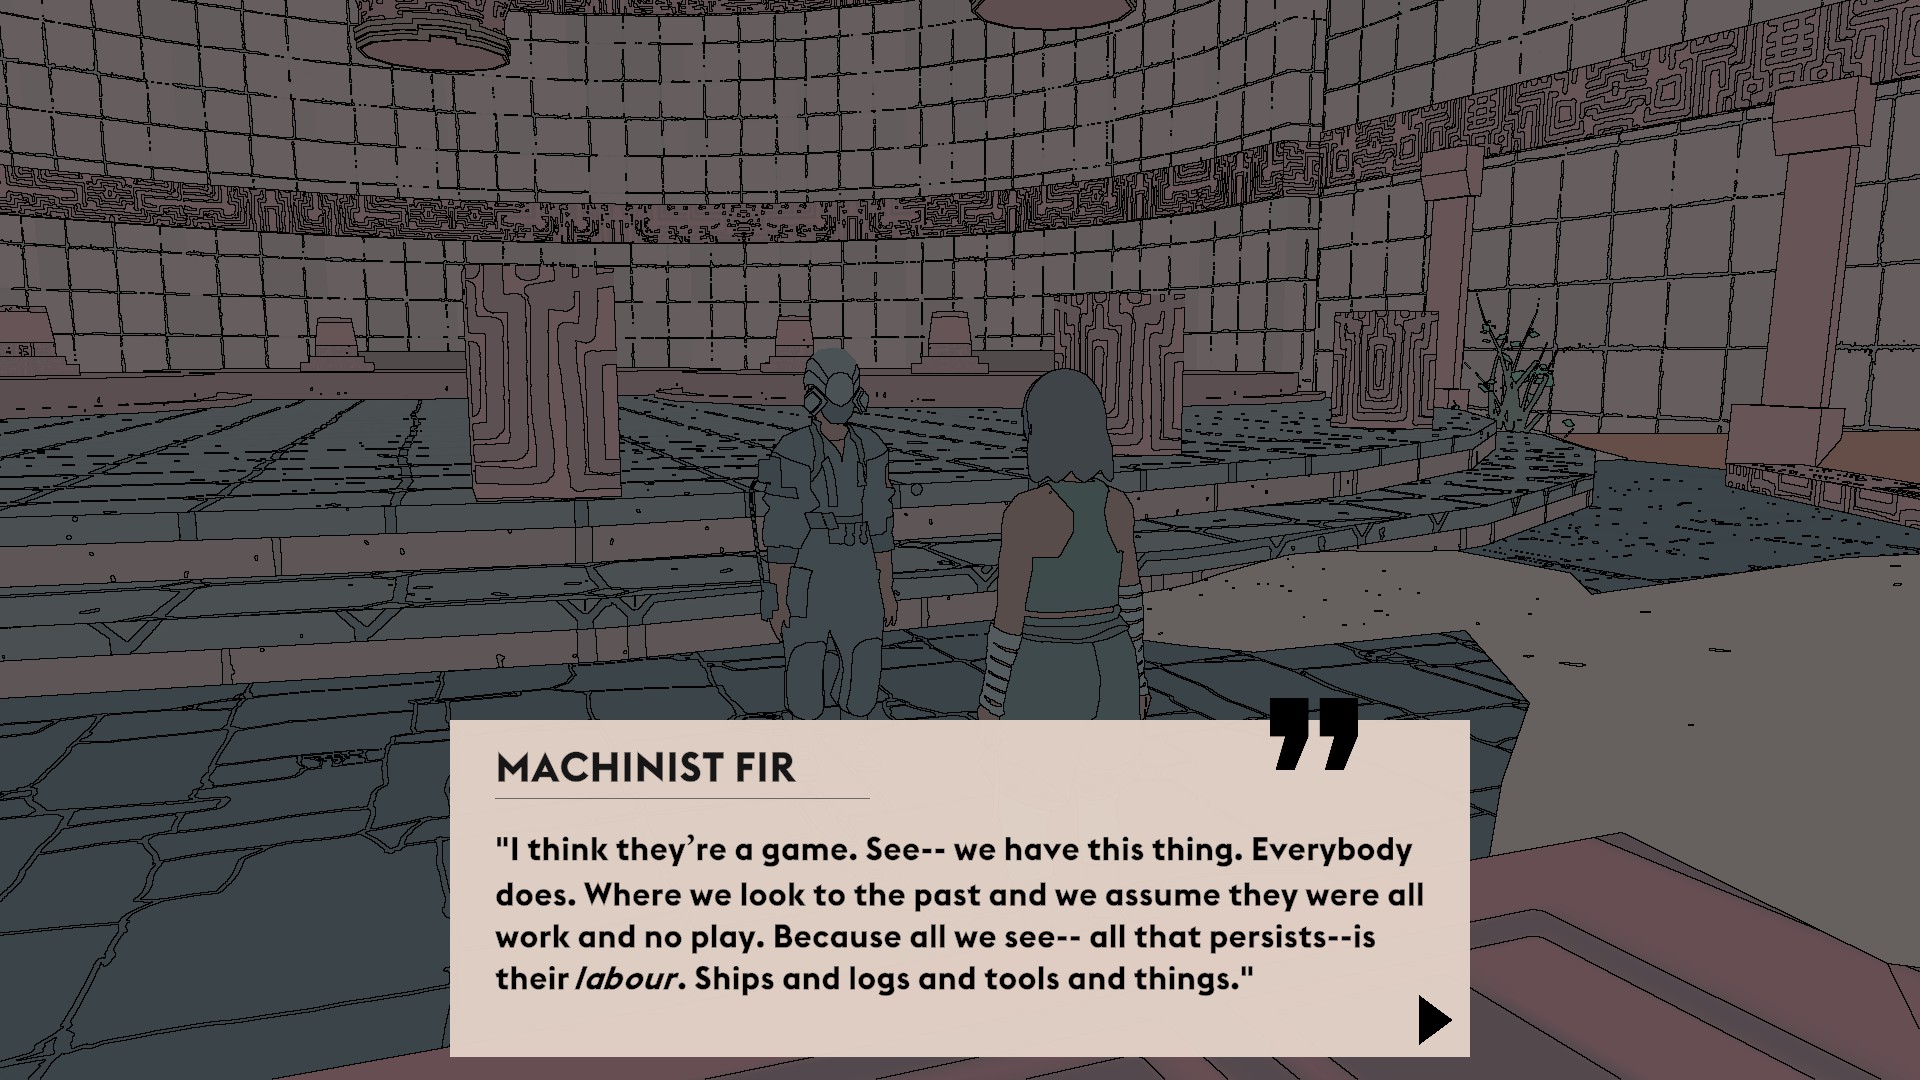 MACHINIST FIR: I think they're a game. See-- we have this thing. Everybody does. Where we look to the past and we assume they were all work and no play. Because all we see-- all that persists--is their labour. Ships and logs and tools and things.